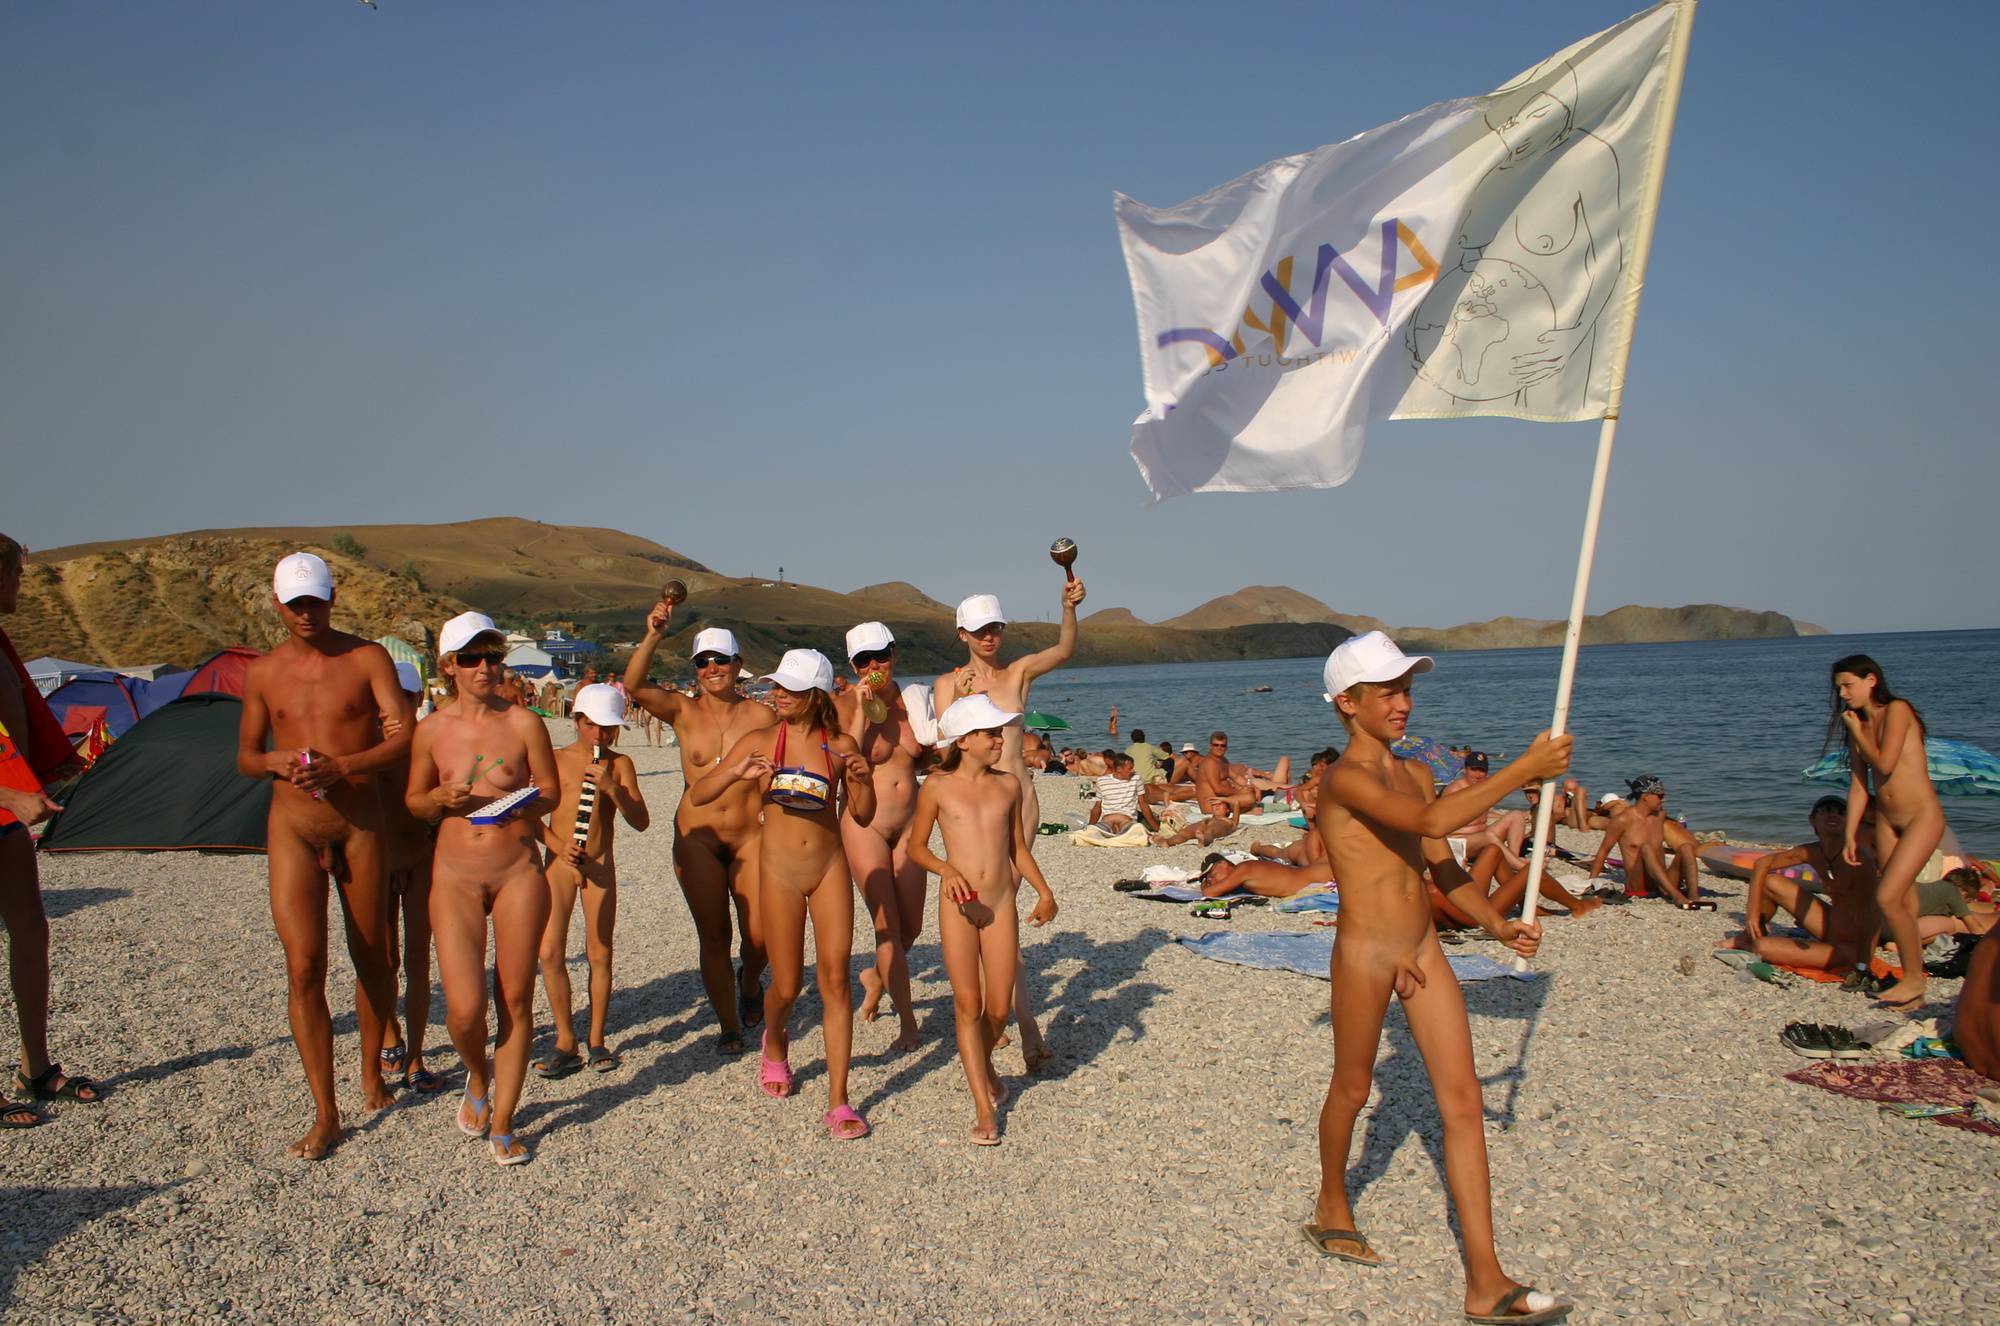 Pure Nudism Images-Flag Follows the Drummer - 1